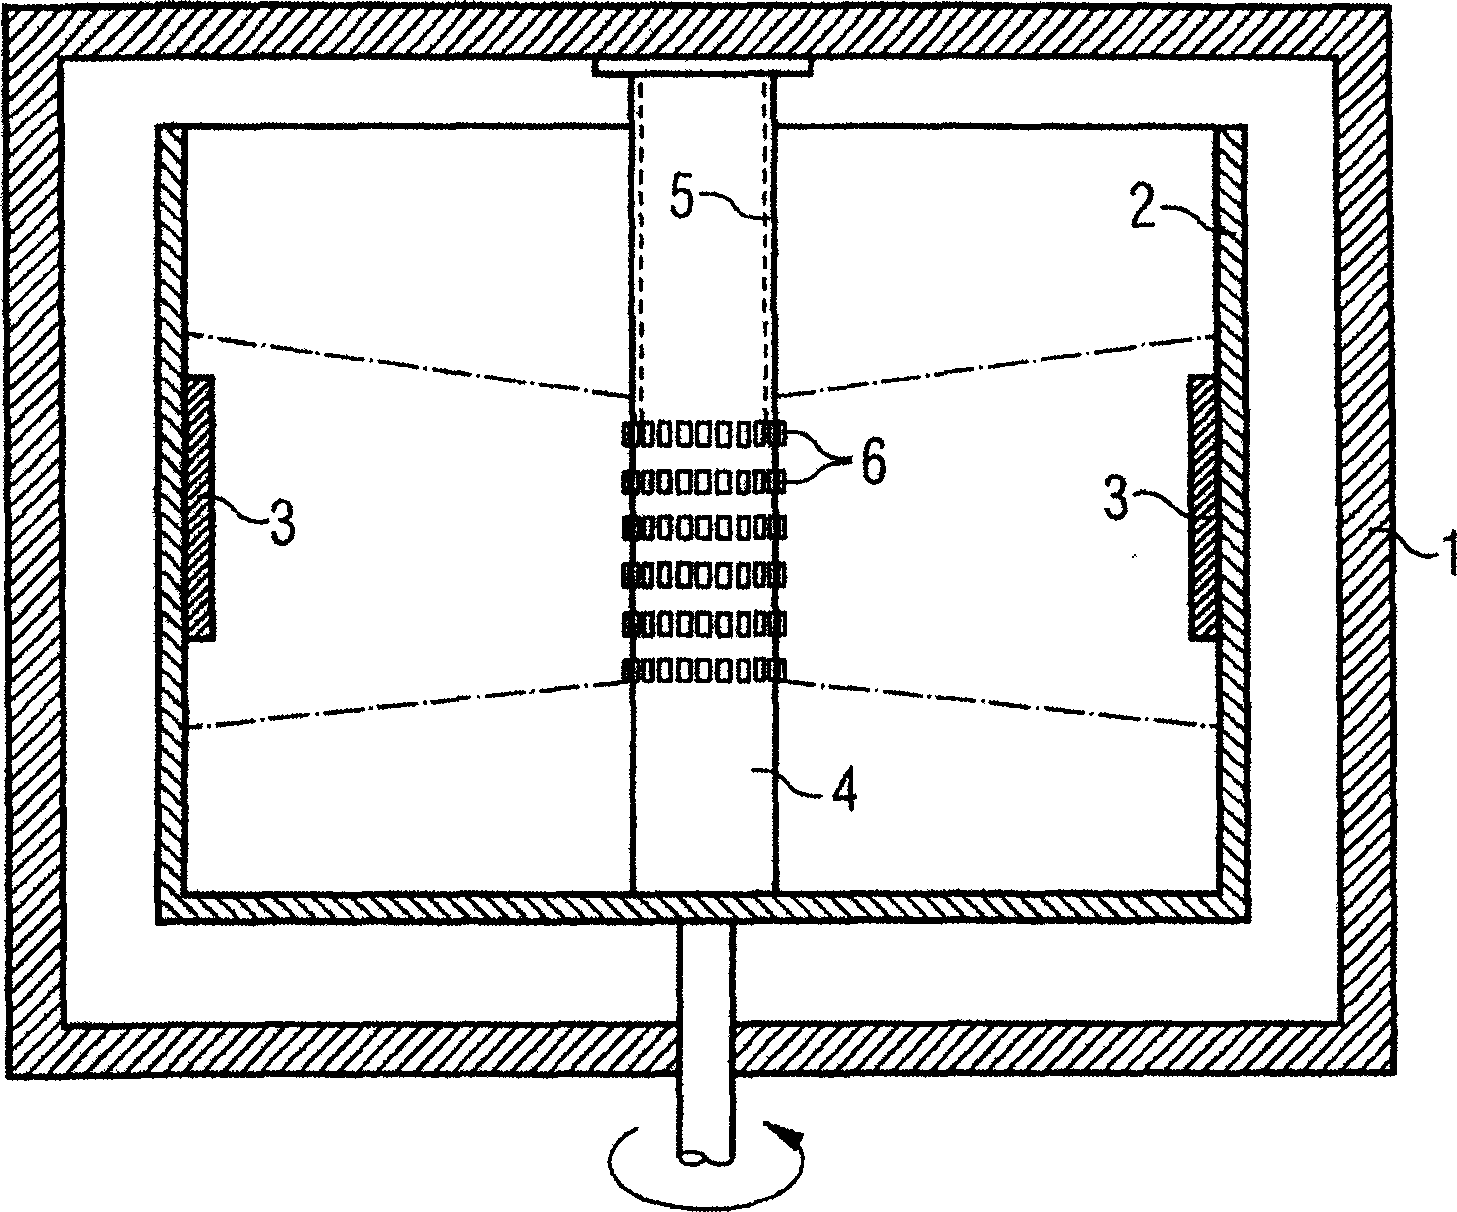 UV light-emitting diodes as a radiation source in a device for the artificial weathering of samples